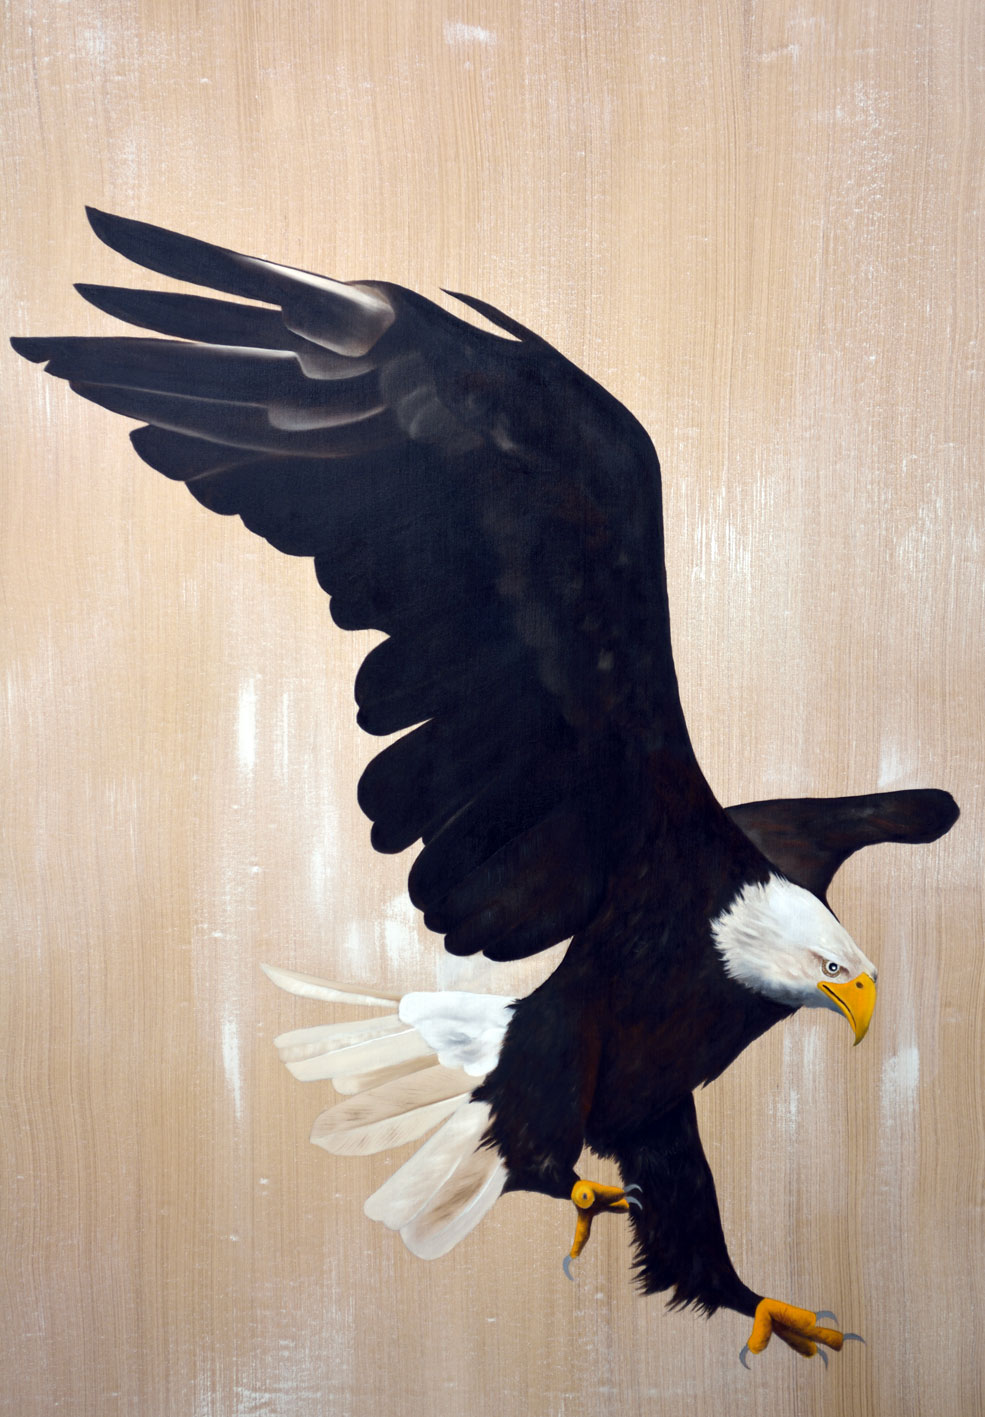 BALD-EAGLE Bald-eagle- Thierry Bisch Contemporary painter animals painting art decoration nature biodiversity conservation